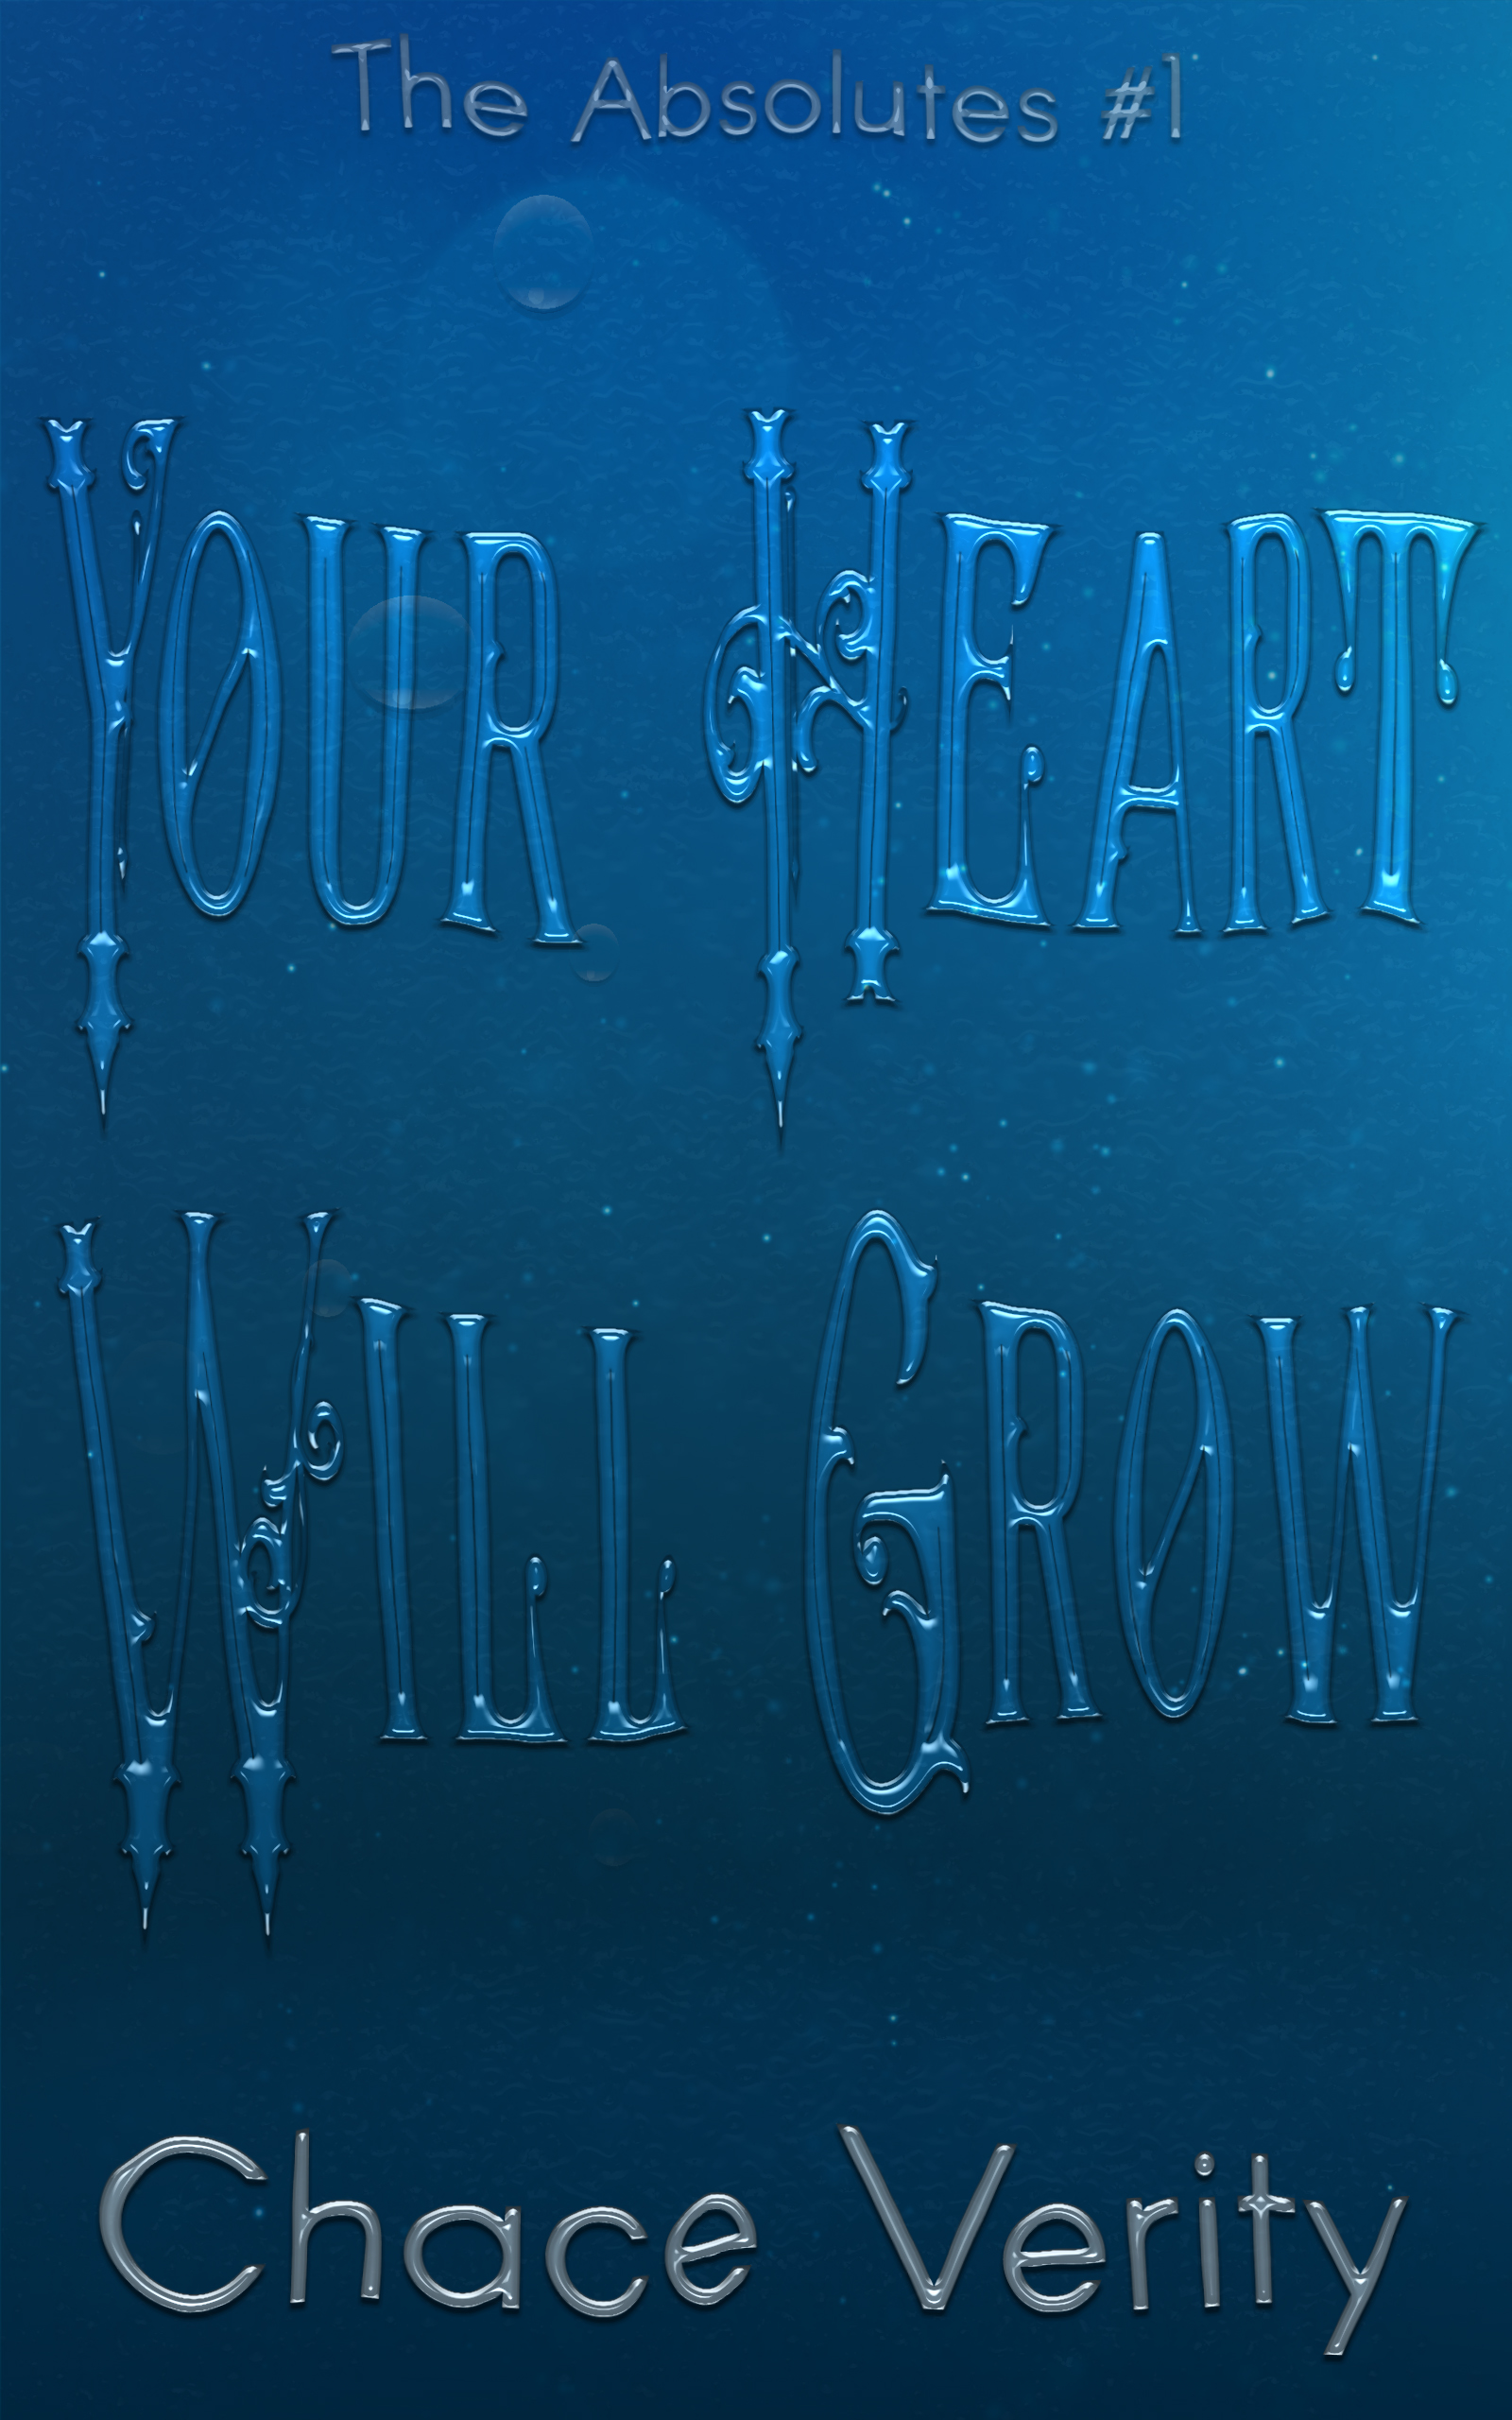 cover for Chace Verity's Your Heart Will Grow featuring the book title in an underwater effect against a blue background